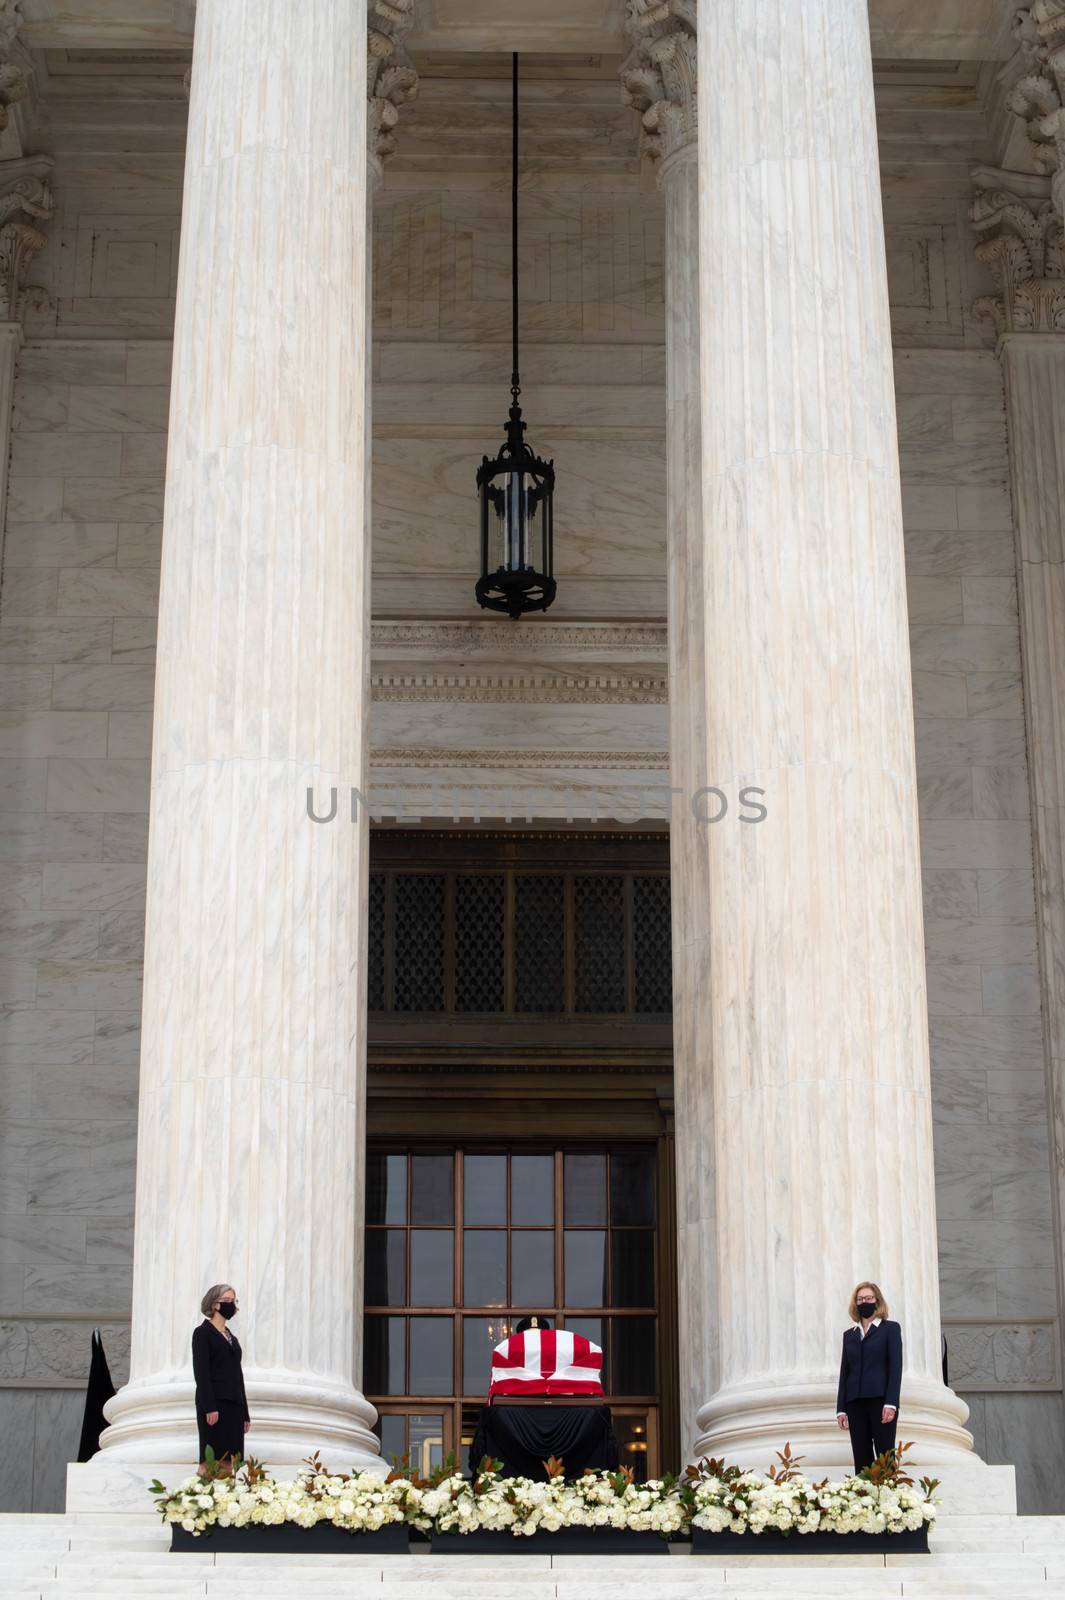 Washington, DC, USA / 9/24/2020: Justice Ruth Bader Ginsburg's casket draped in an American flag on the steps of the Supreme Court, pall bearers and tall columns in vertical image. Editorial use